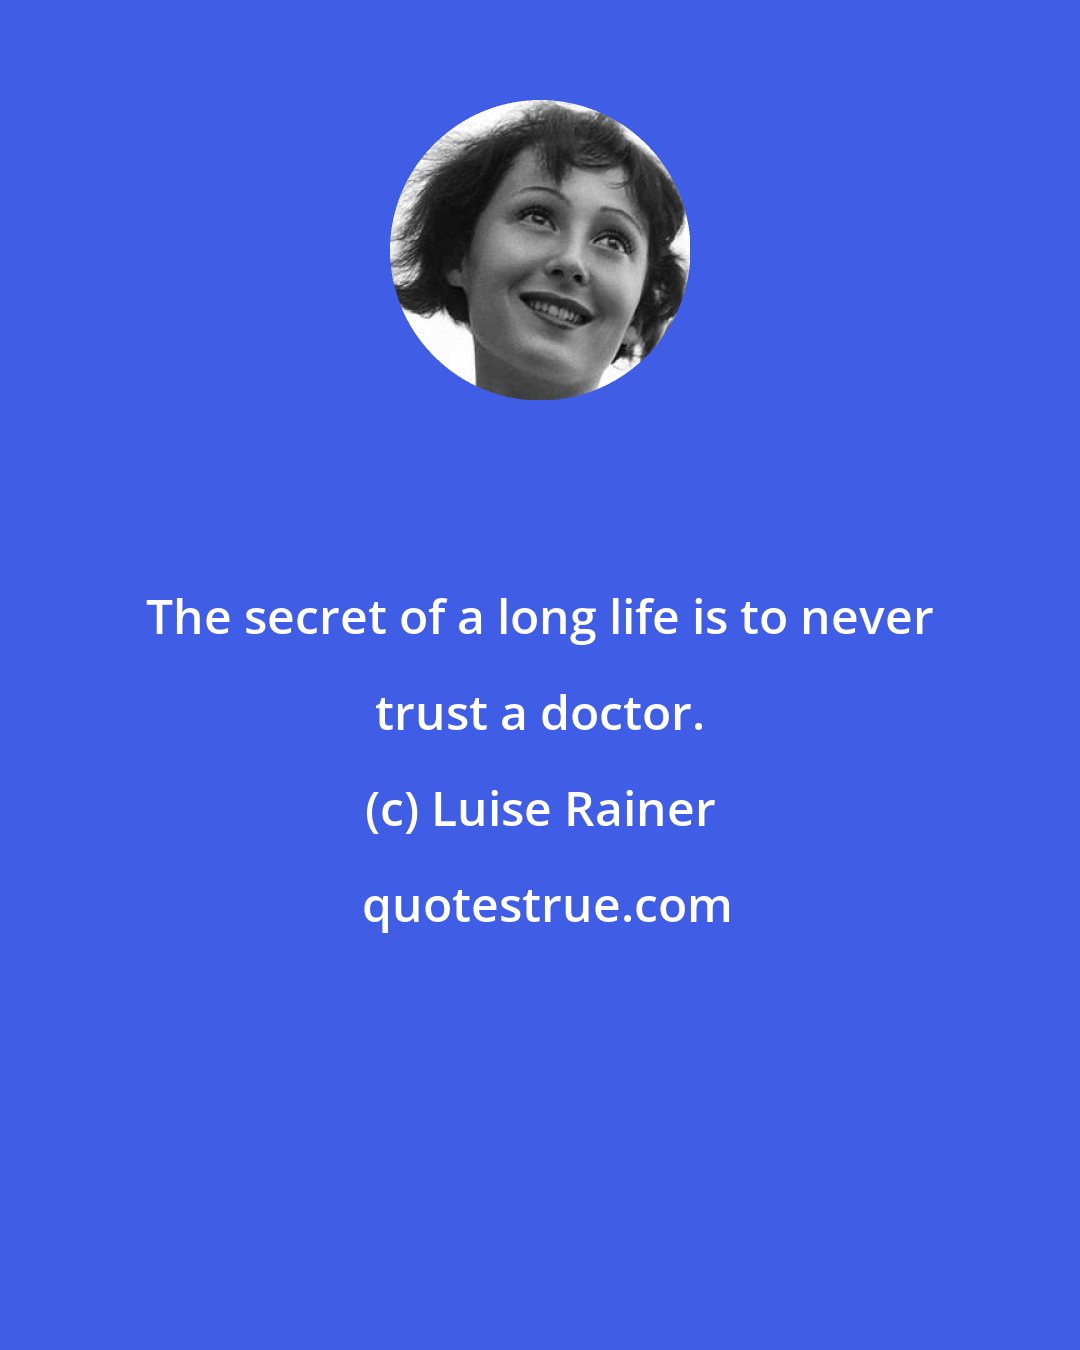 Luise Rainer: The secret of a long life is to never trust a doctor.